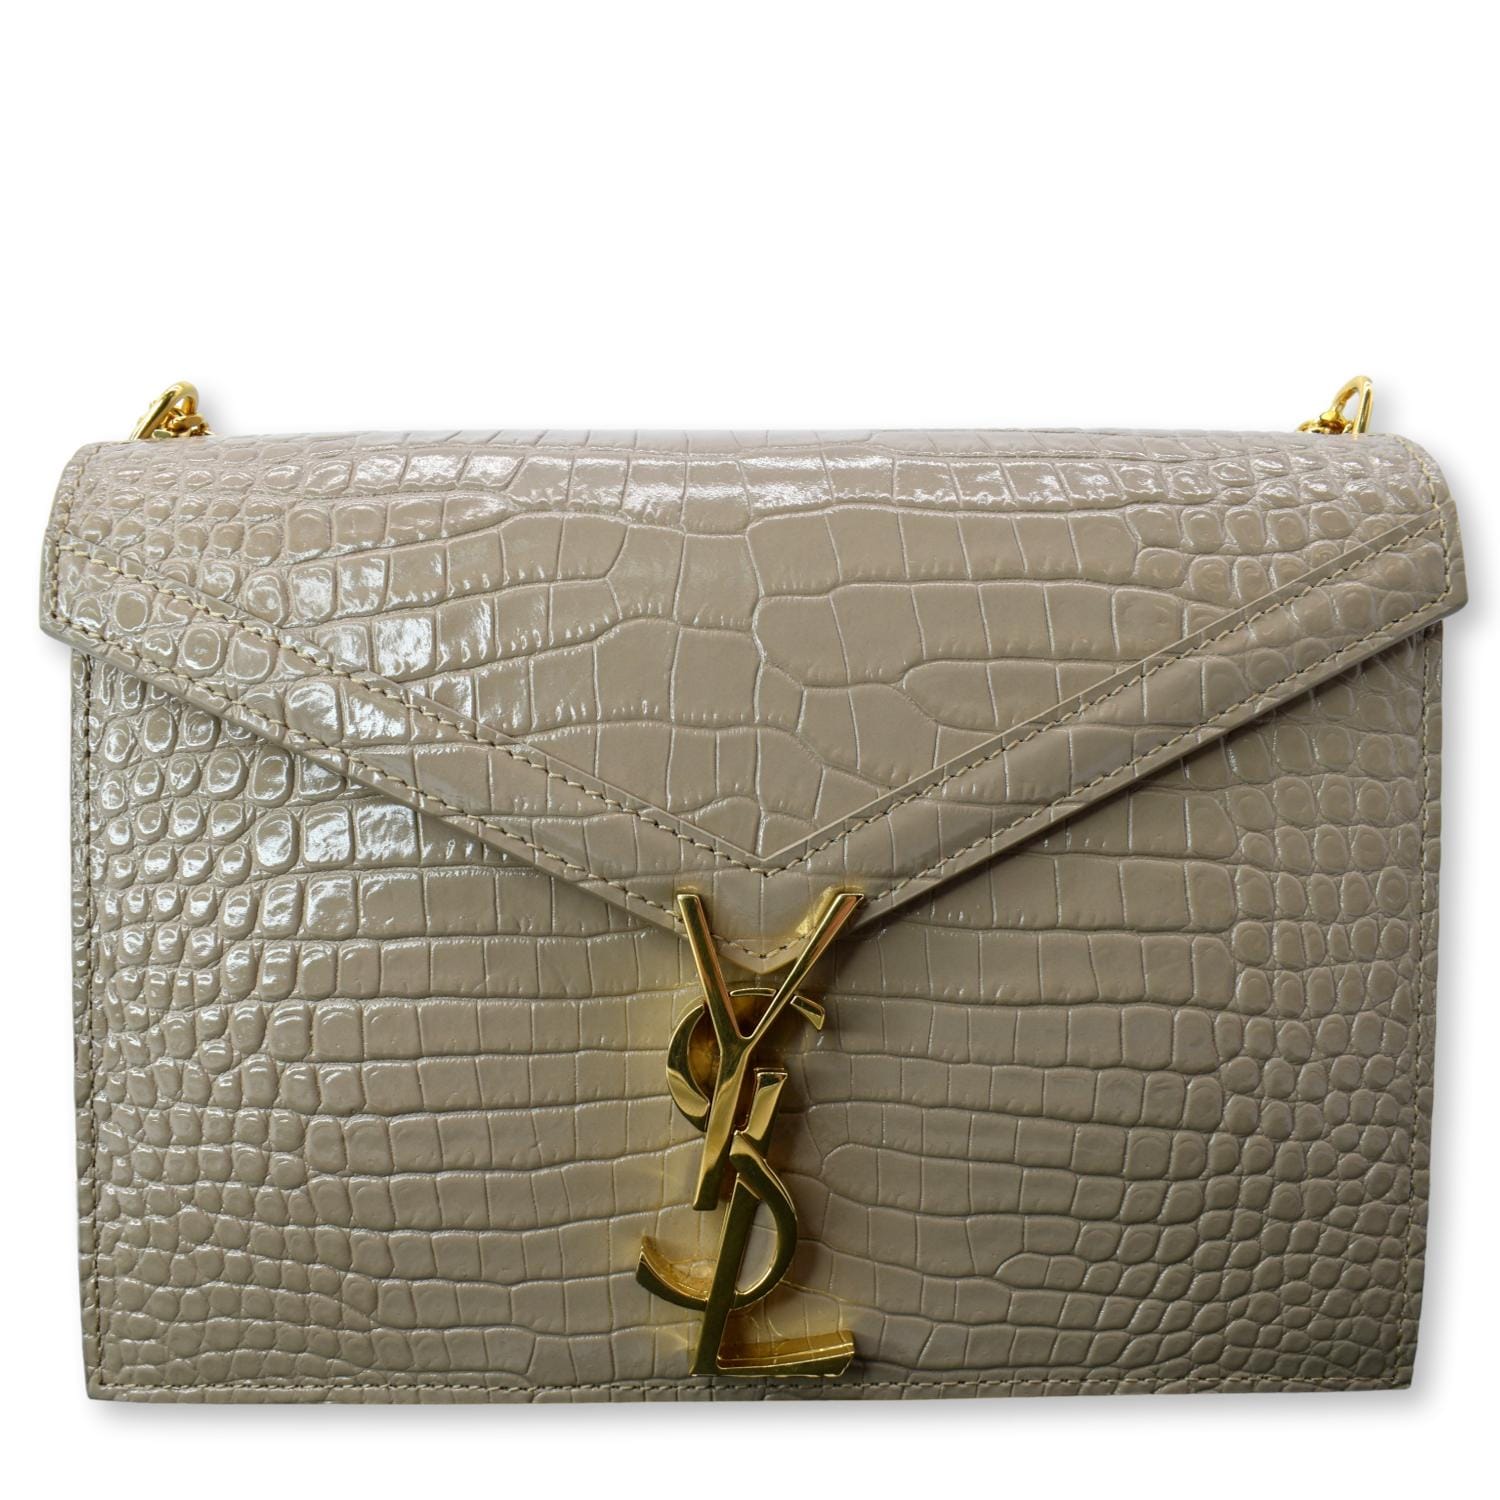 Yves Saint Laurent Beige Clutch Bag Second YSL Logo Leather With